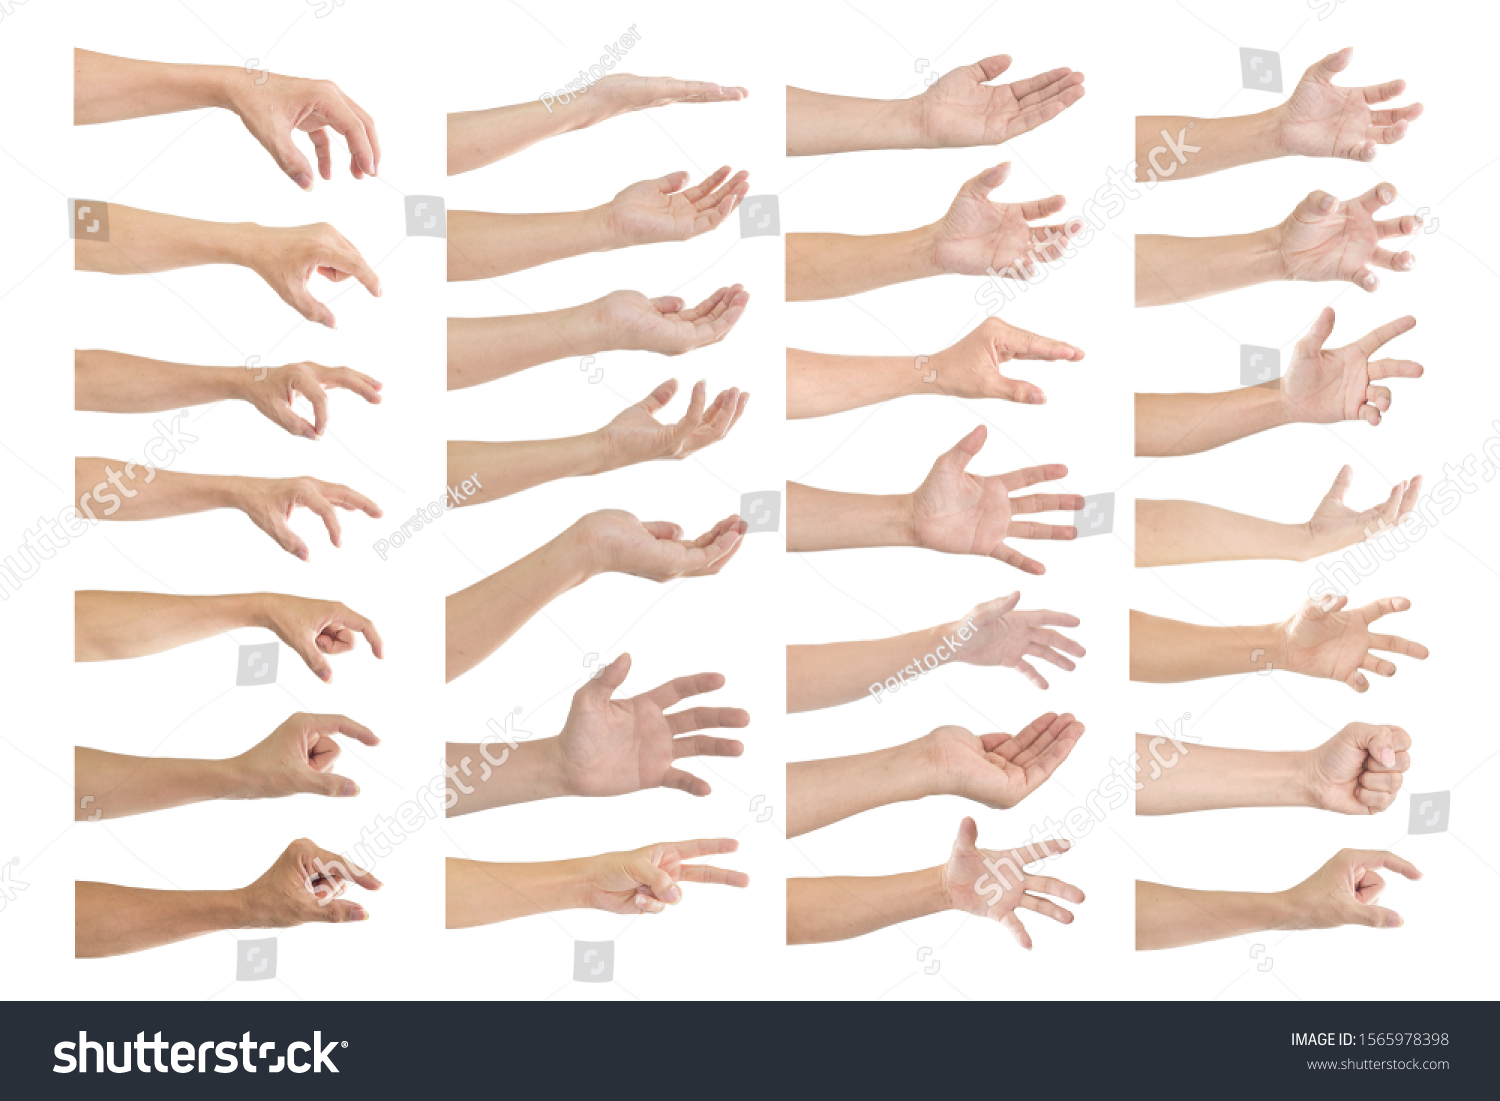 Set of male hand gestures isolated on a white background. #1565978398